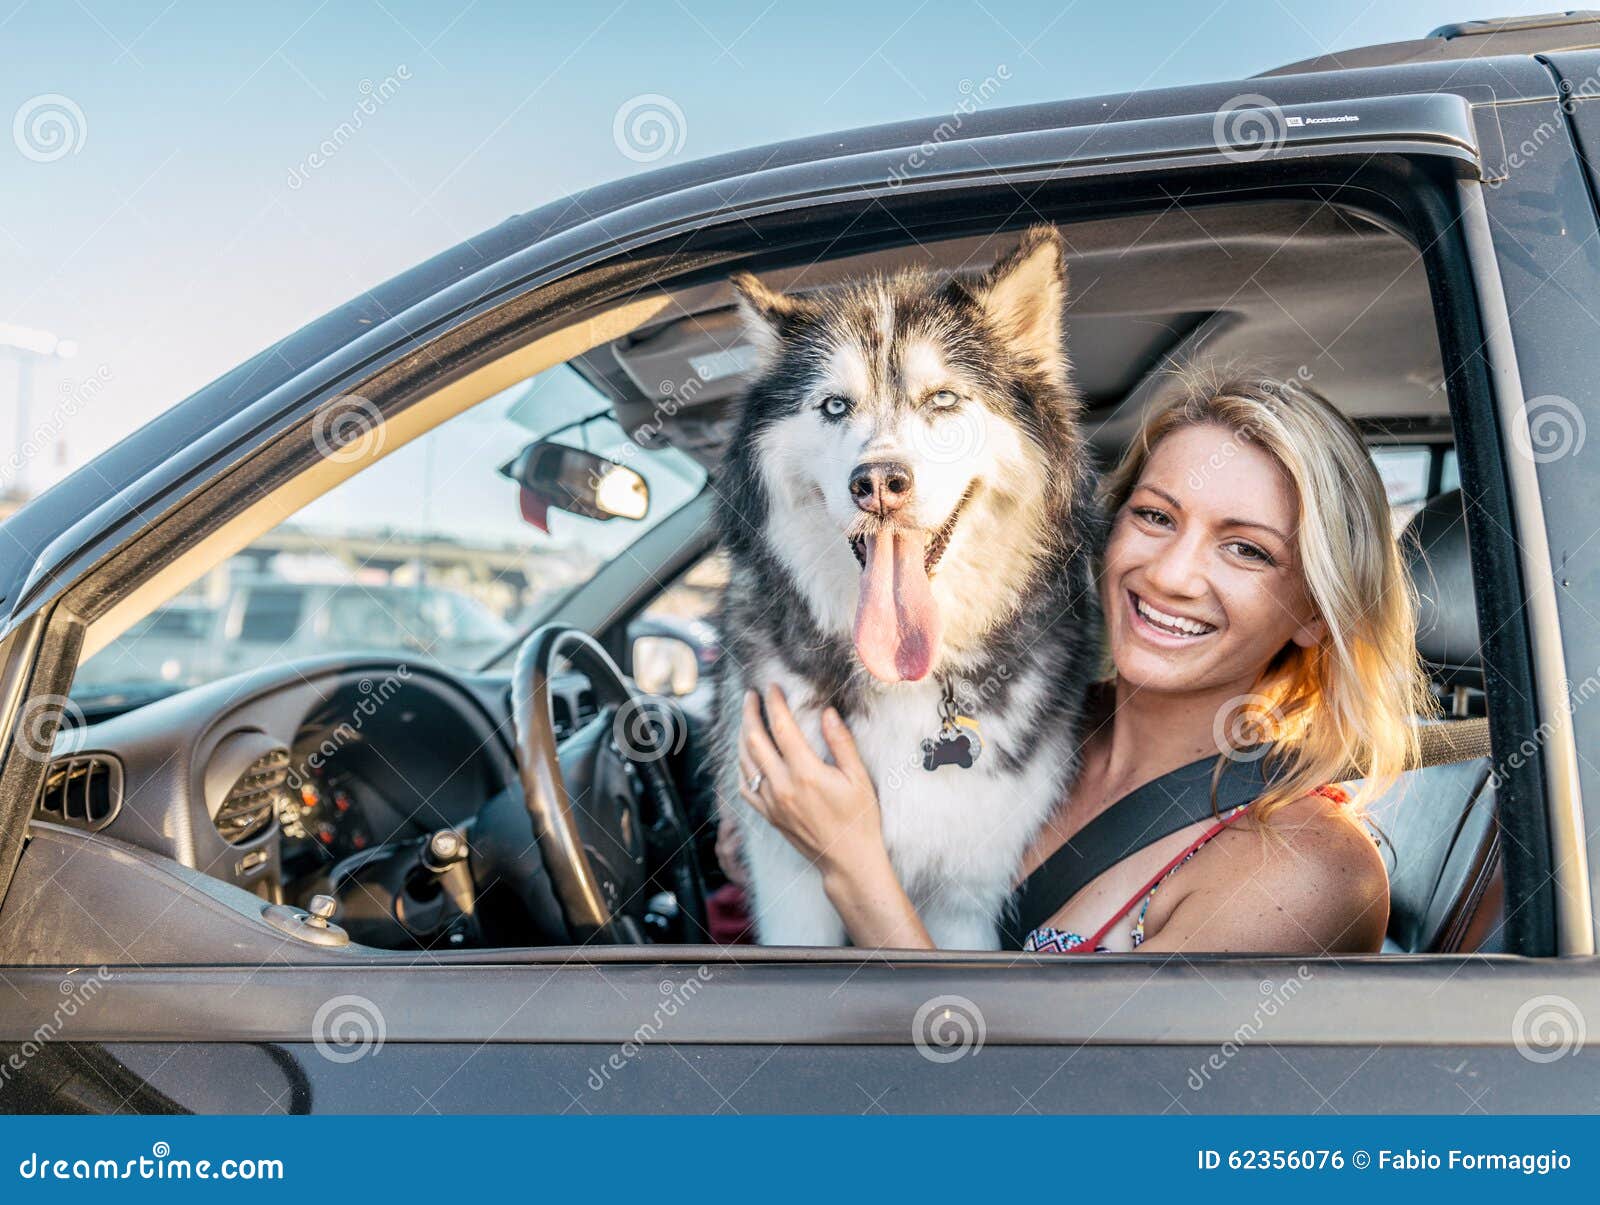 Dog and woman in a car stock photo. Image of camera ...